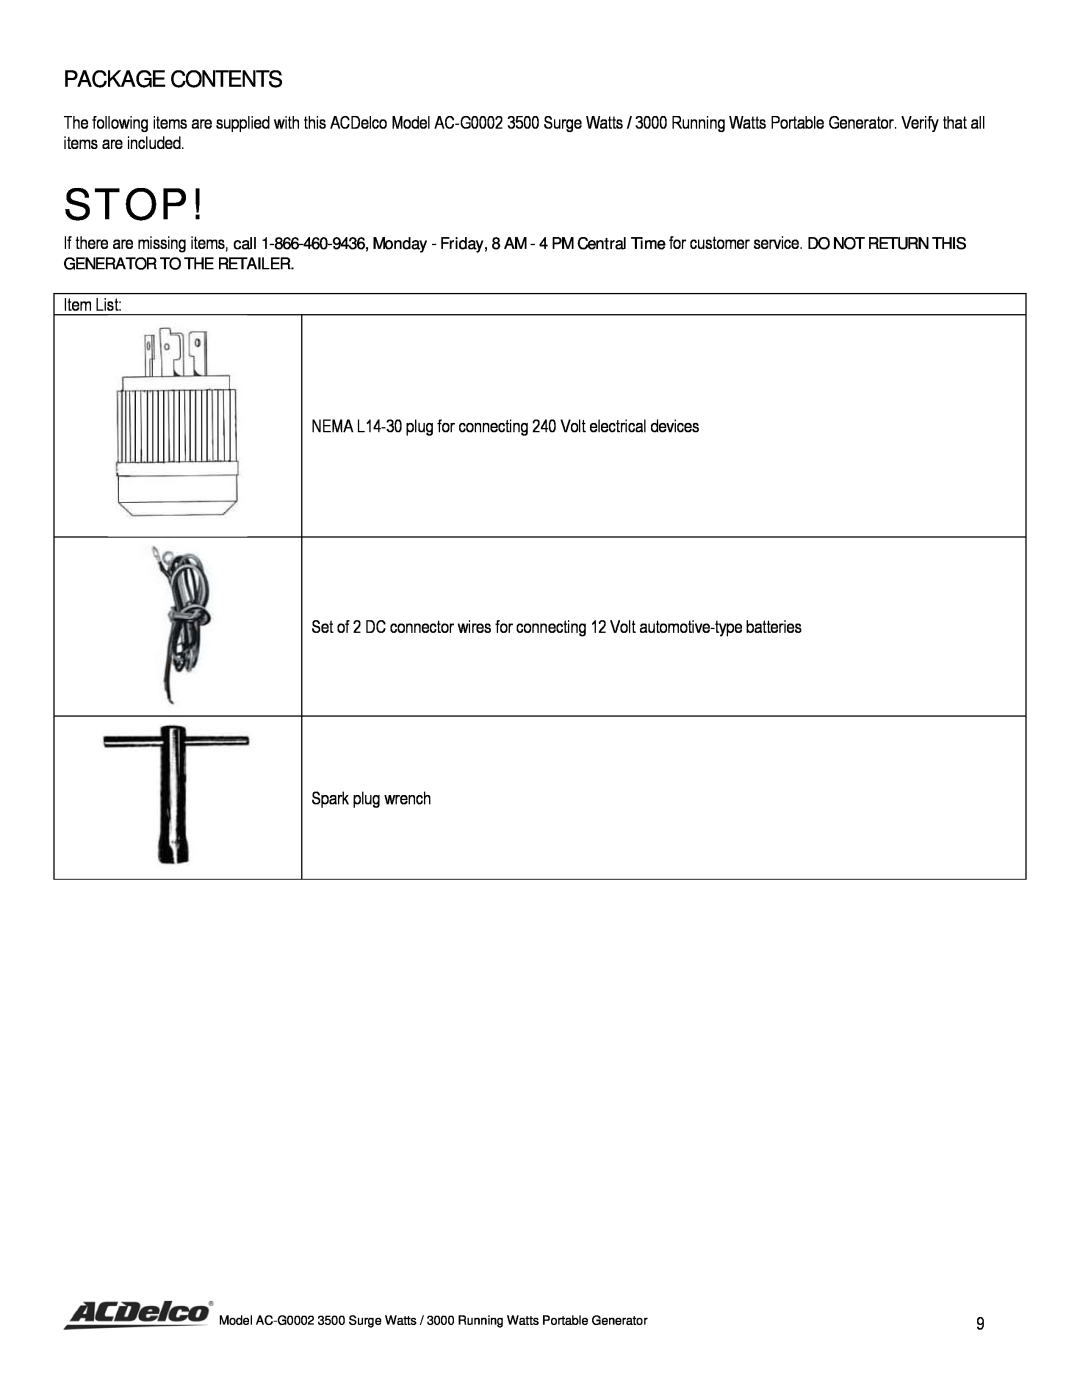 ACDelco AC-G0002 instruction manual Package Contents, Stop, Generator To The Retailer 